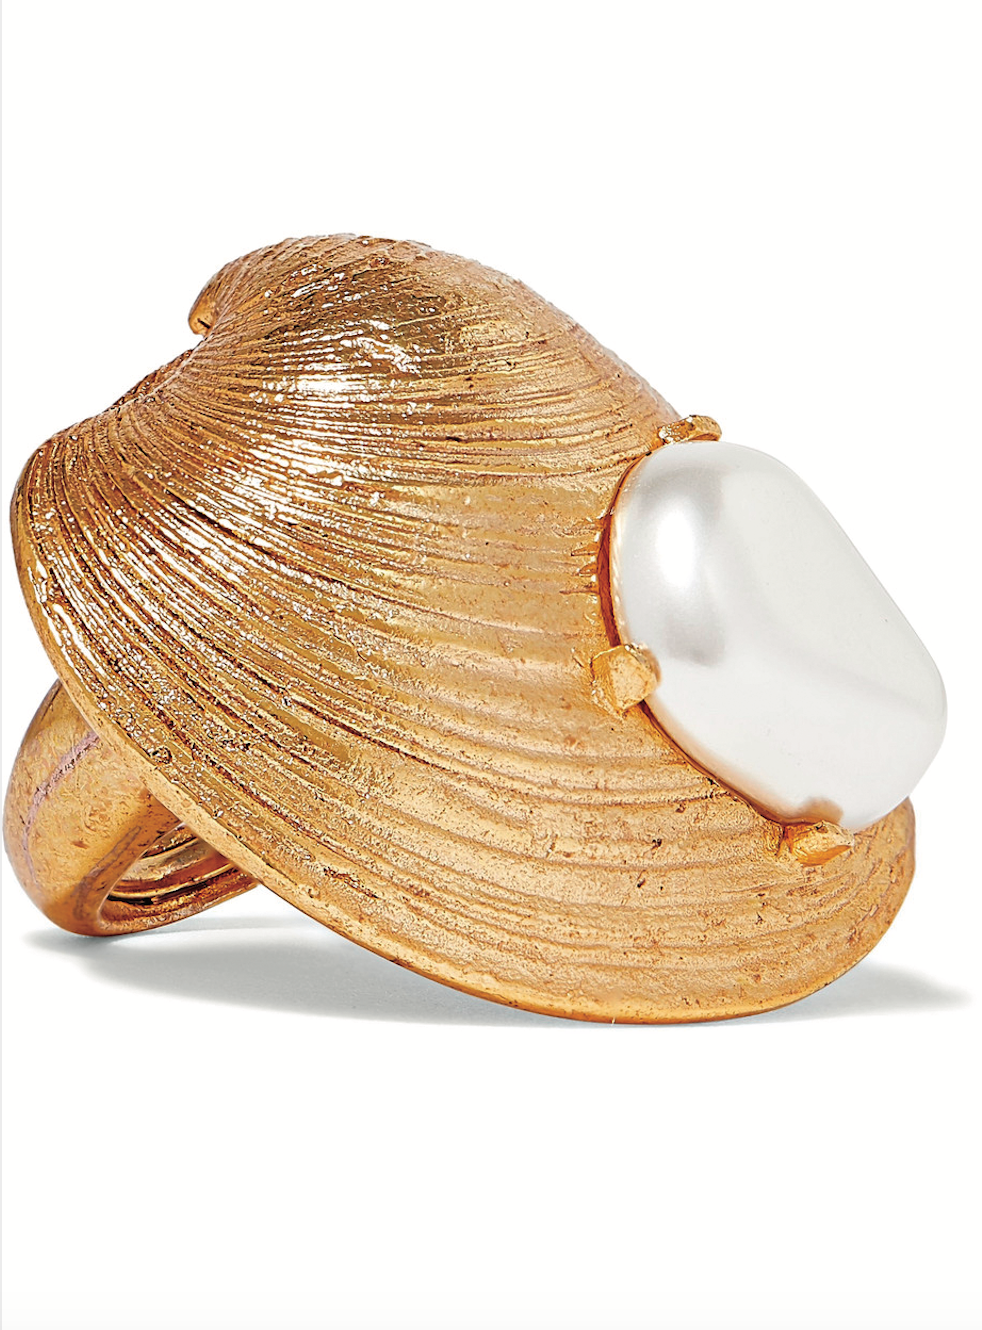 Shop This Summer's Best Seashell Accessories